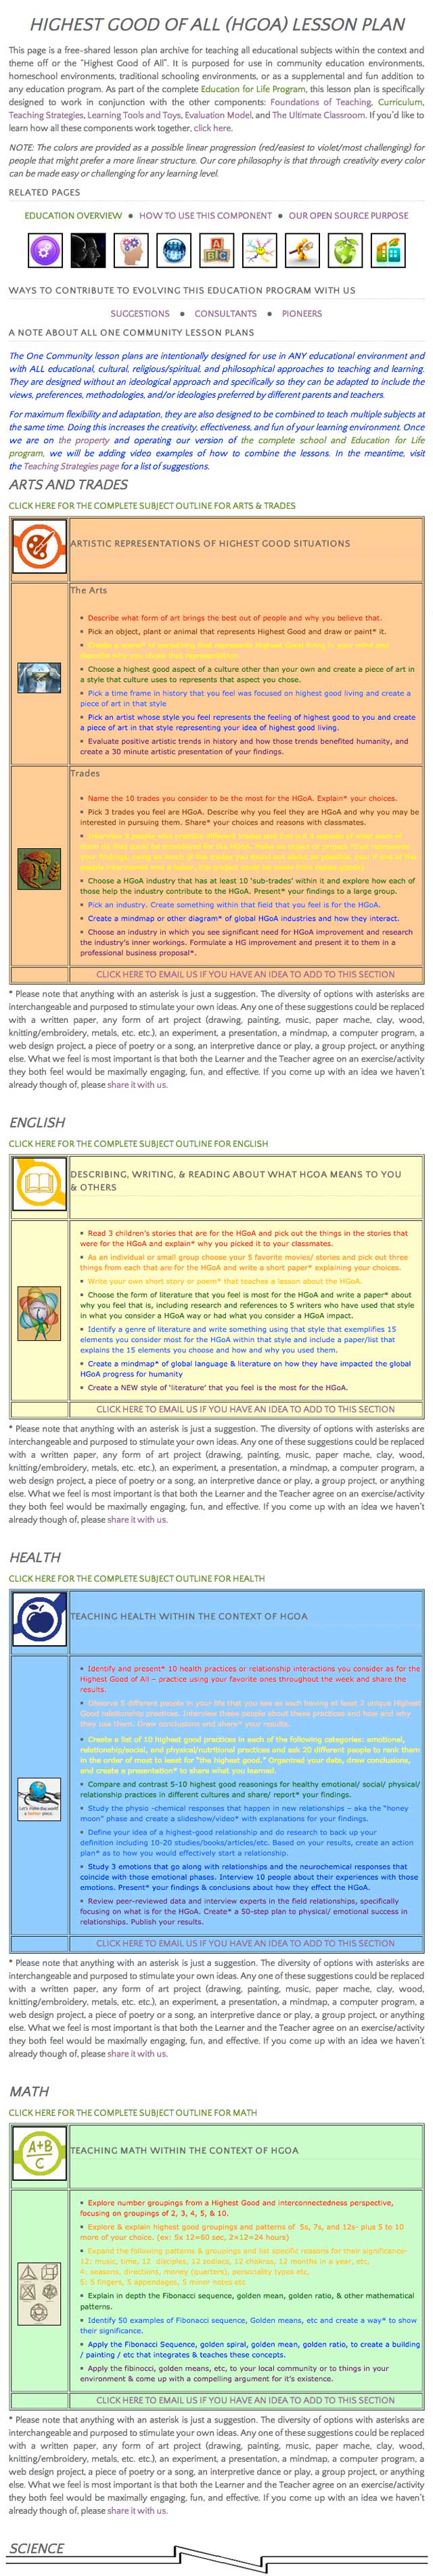 Highest Good of All Lesson Plan Page, One Community